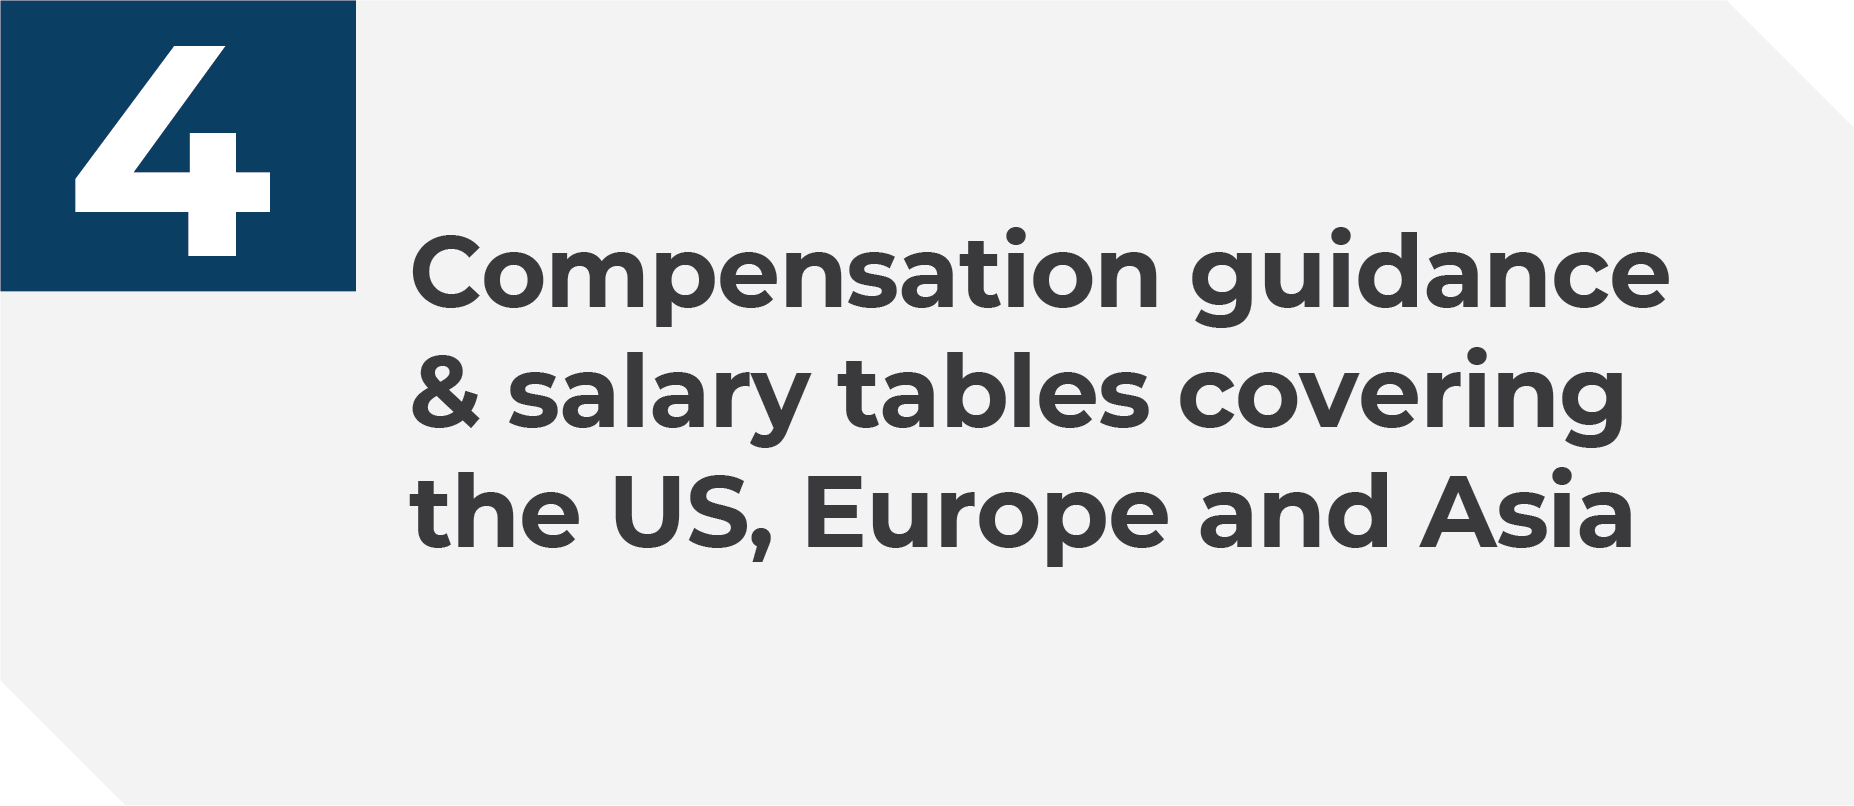 -Compensation guidance and salary tables covering the US, Europe and Asia